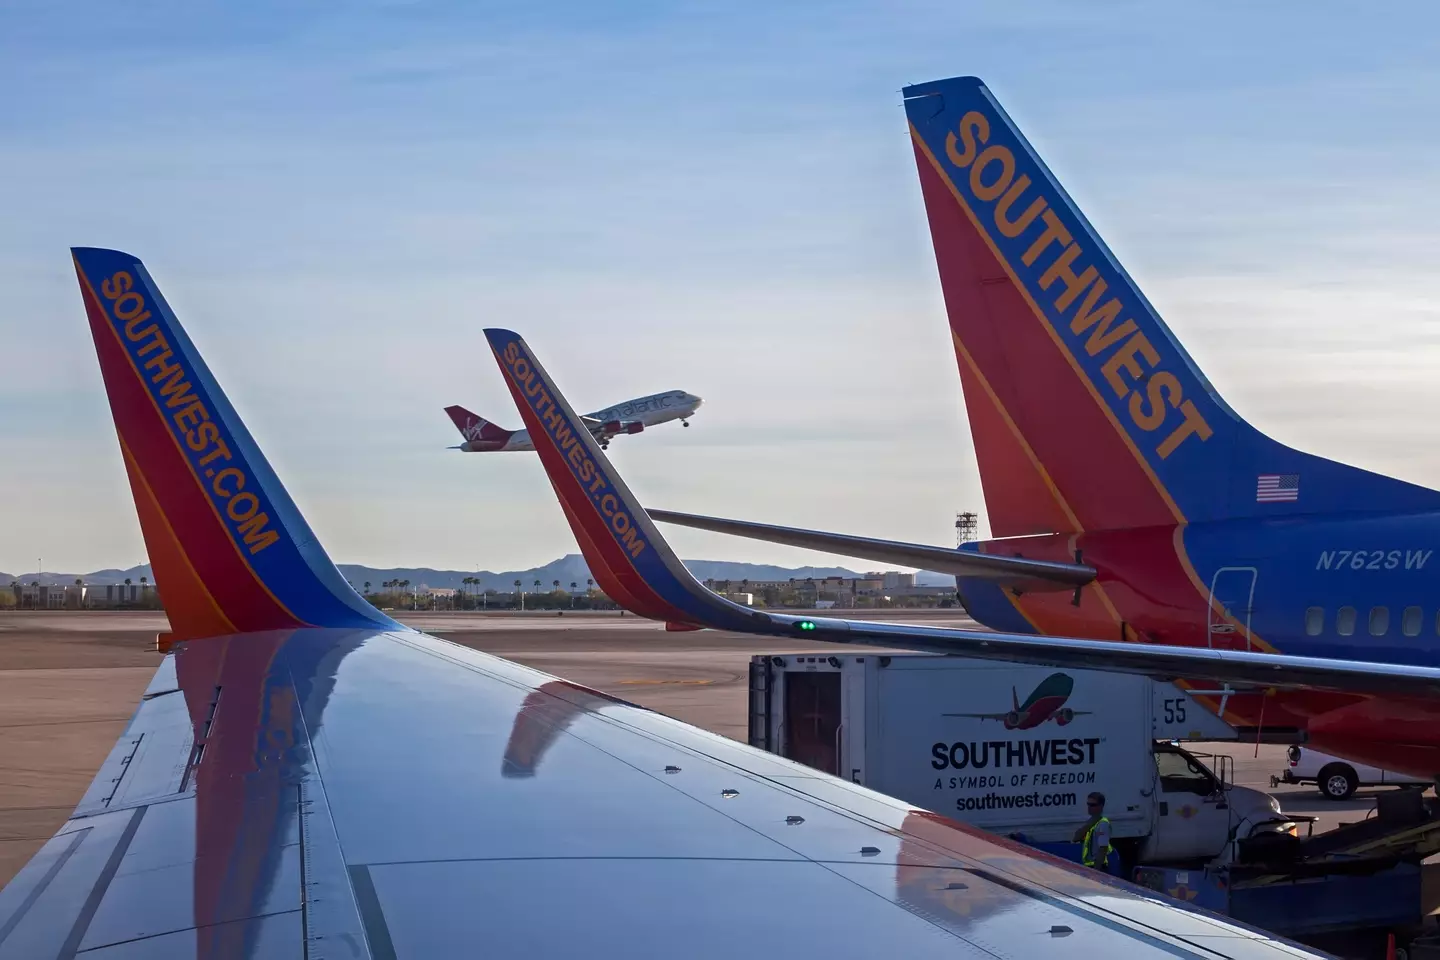 Southwest Airlines have cancelled thousands of flights in the past week.